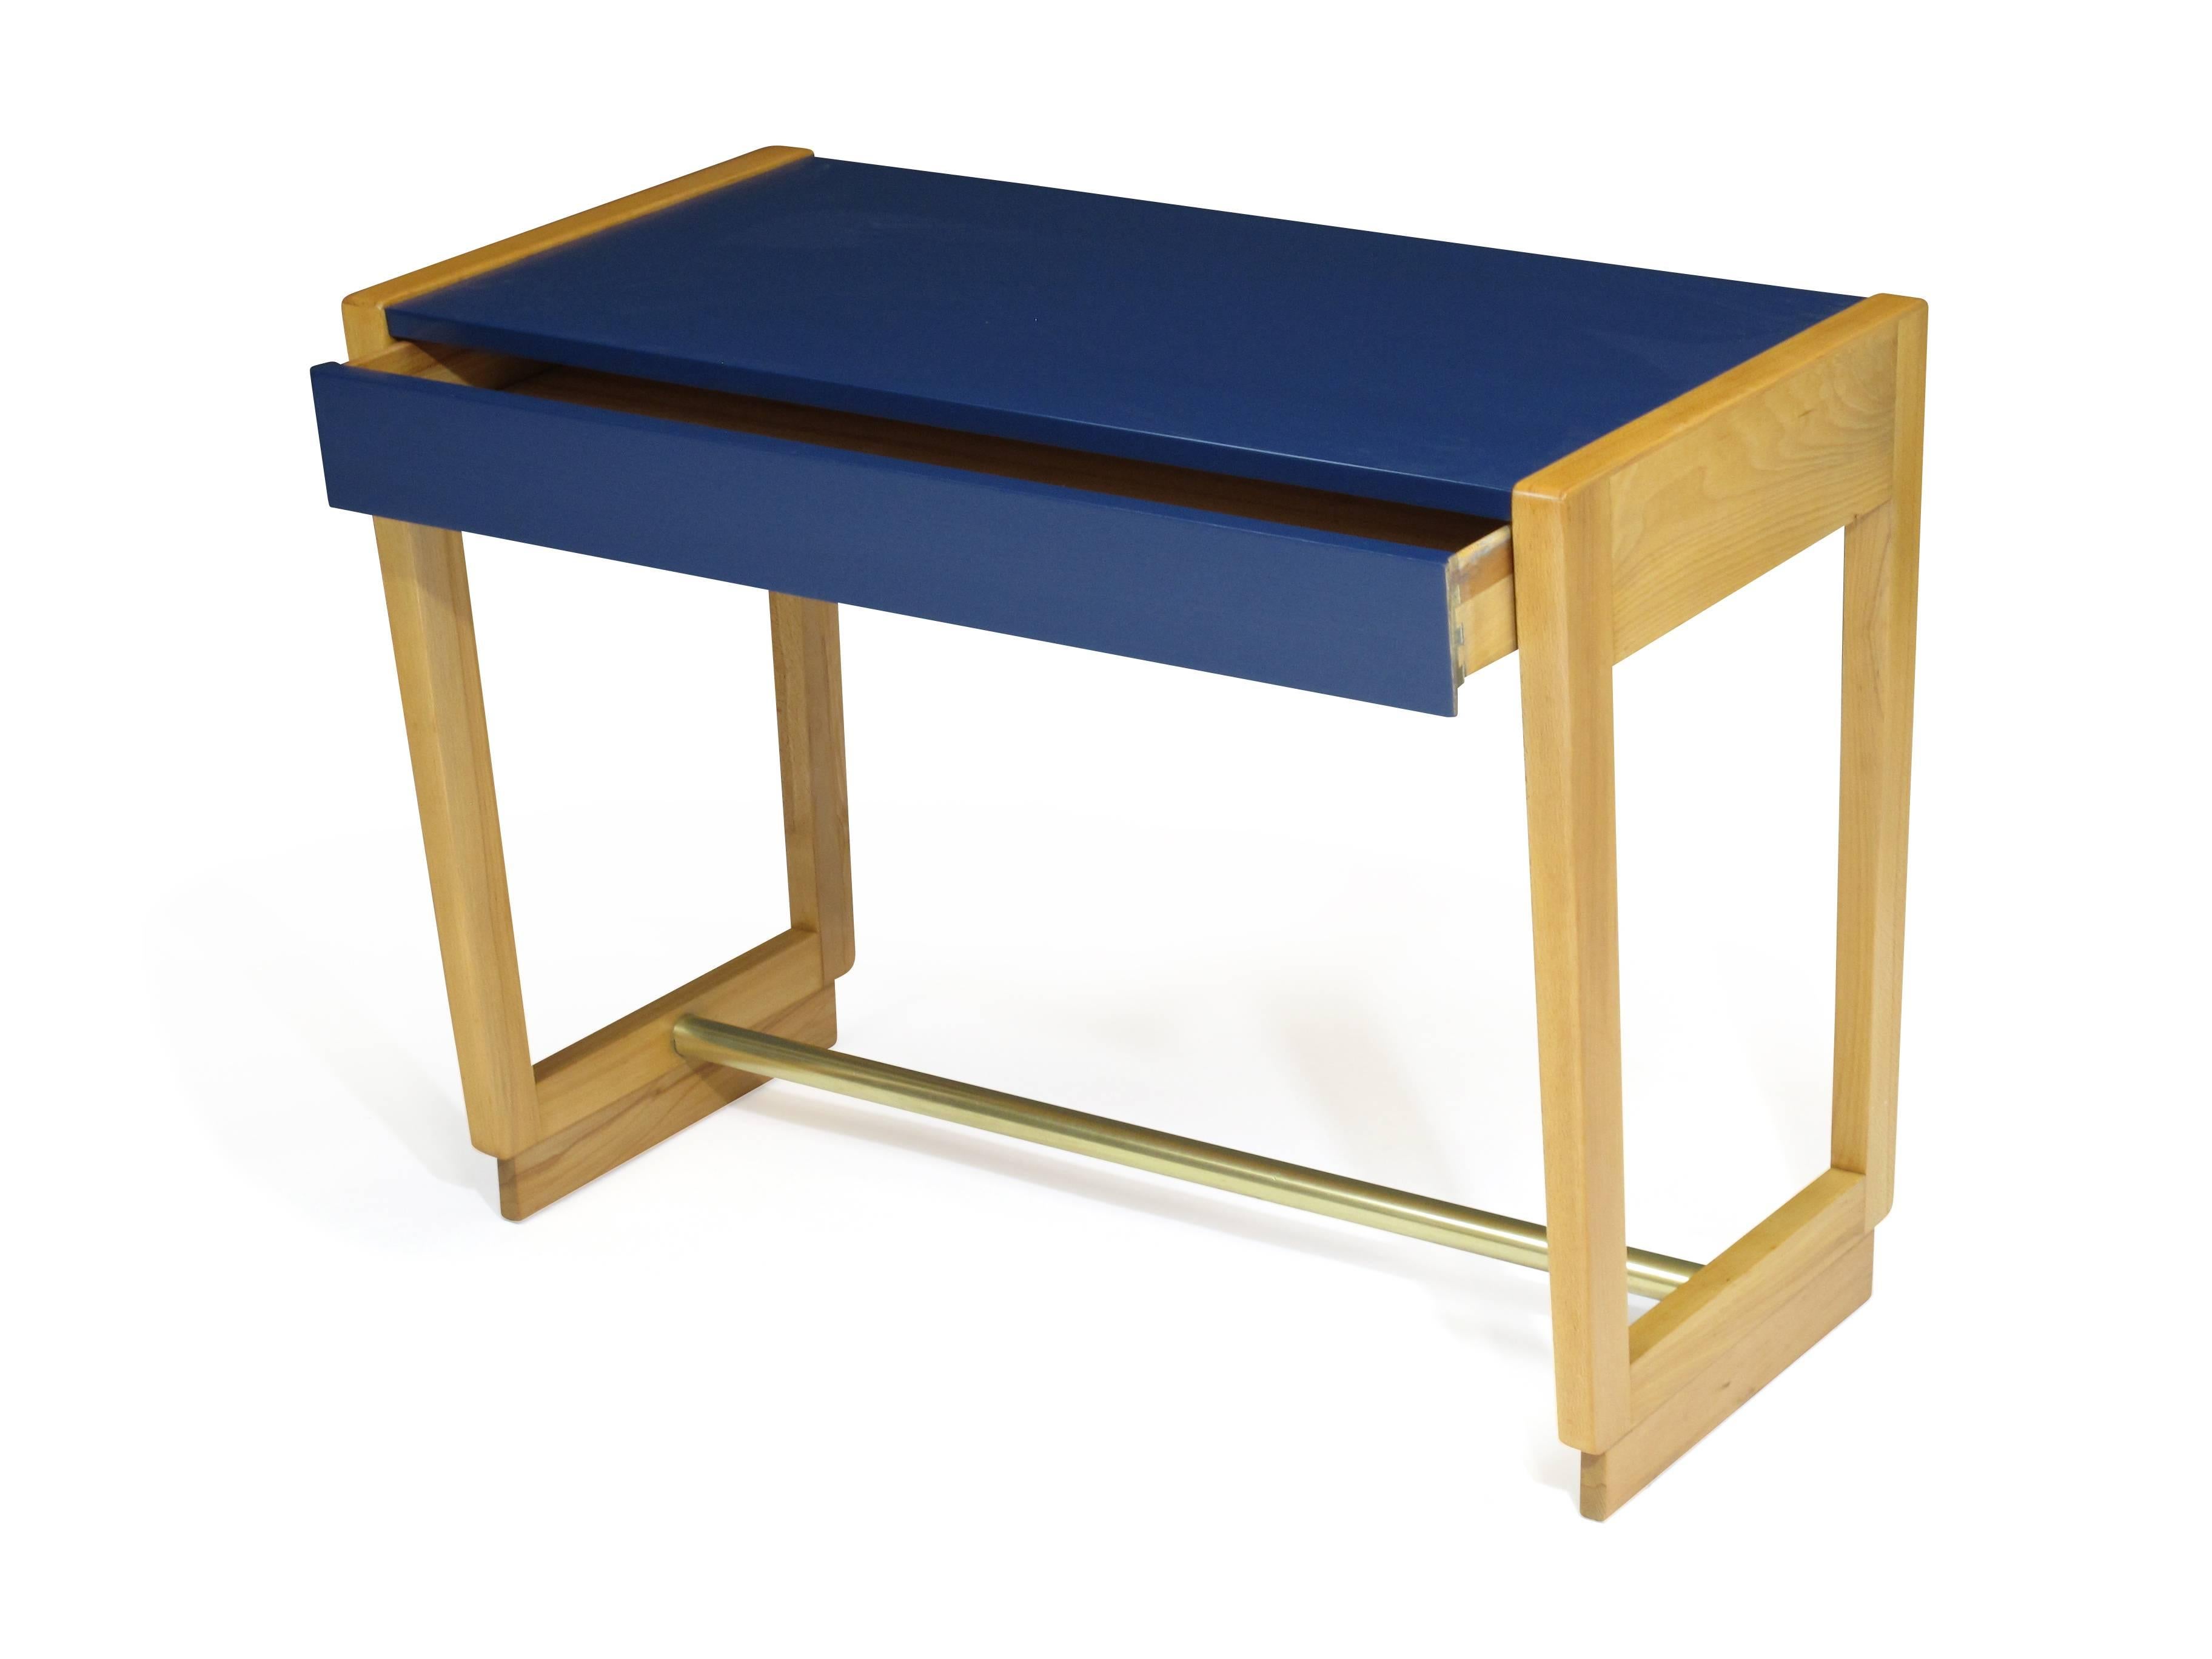 Midcentury single drawer entryway console table in beech with brass stretcher designed by Edward Wormley for the Drexel Precedent Collection, circa 1947. Newly restored with the color block of navy blue lacquer.